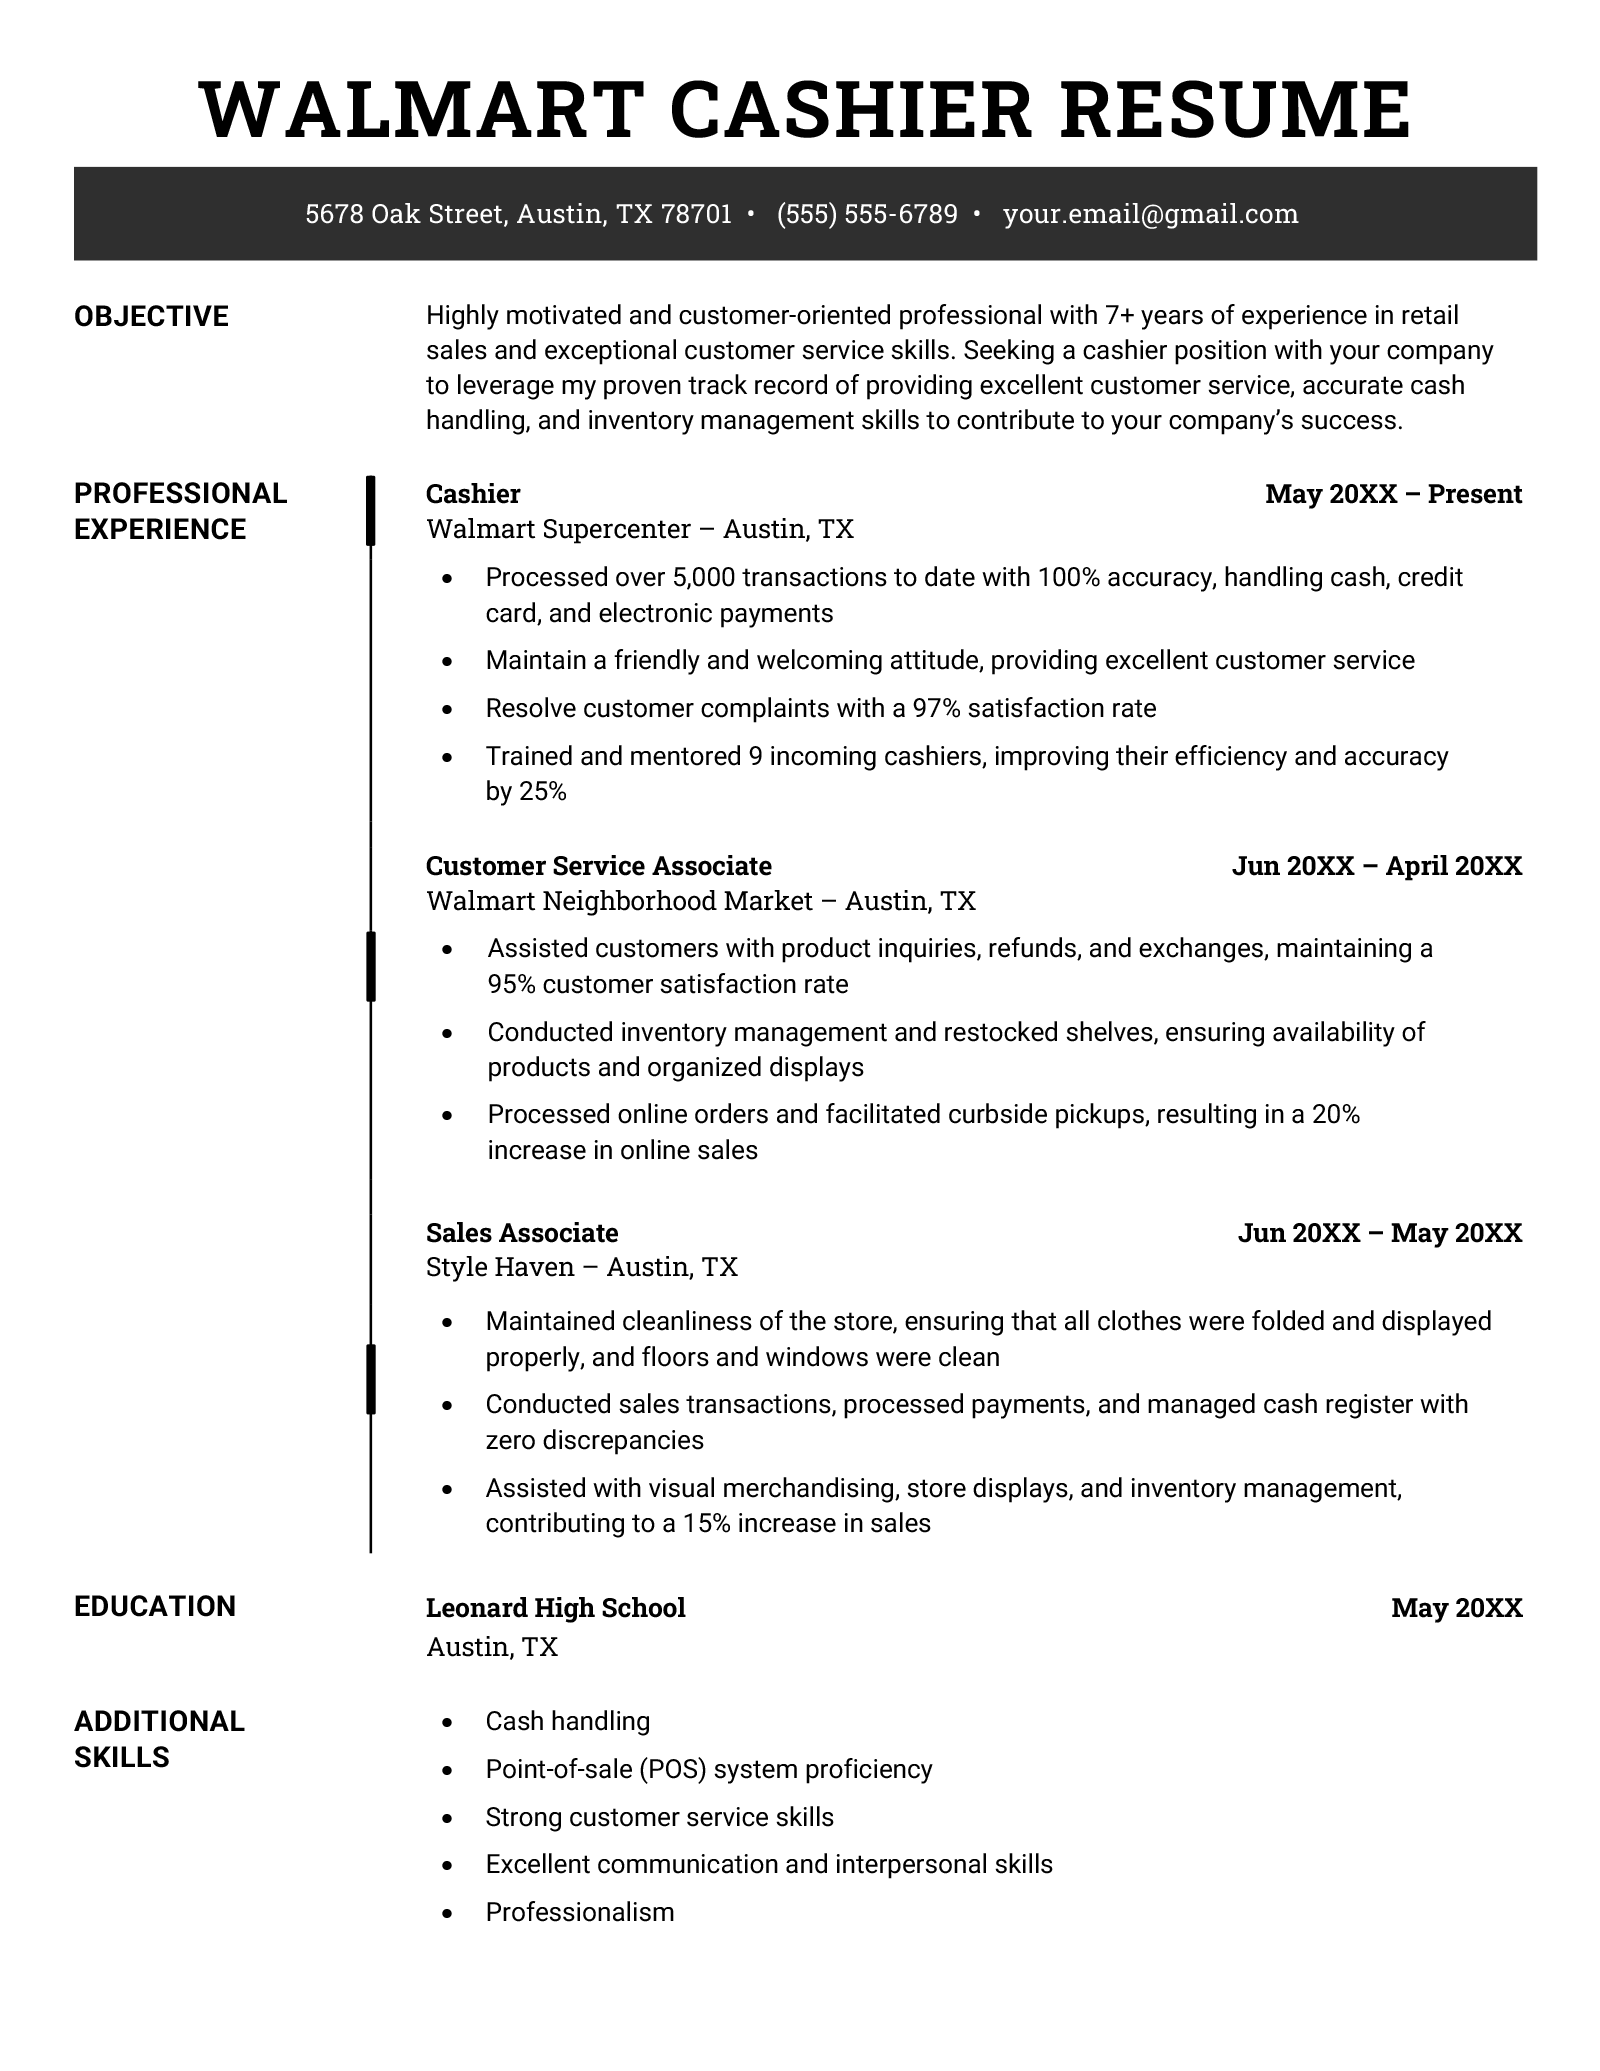 Sample image of a Walmart cashier resume with a professional black template.